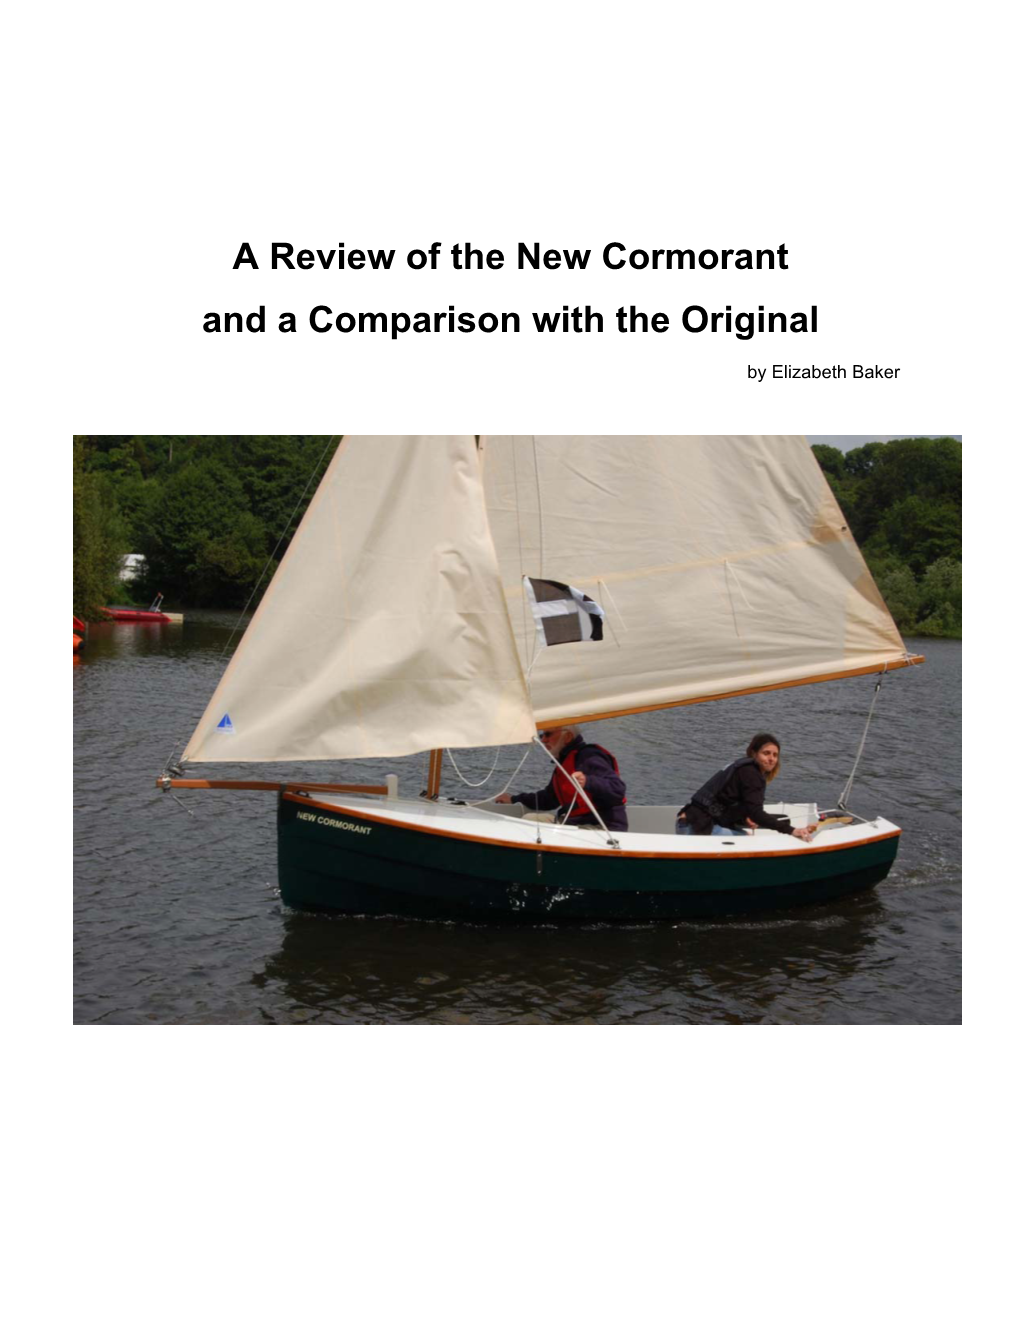 A Review of the New Cormorant and a Comparison with the Original by Elizabeth Baker